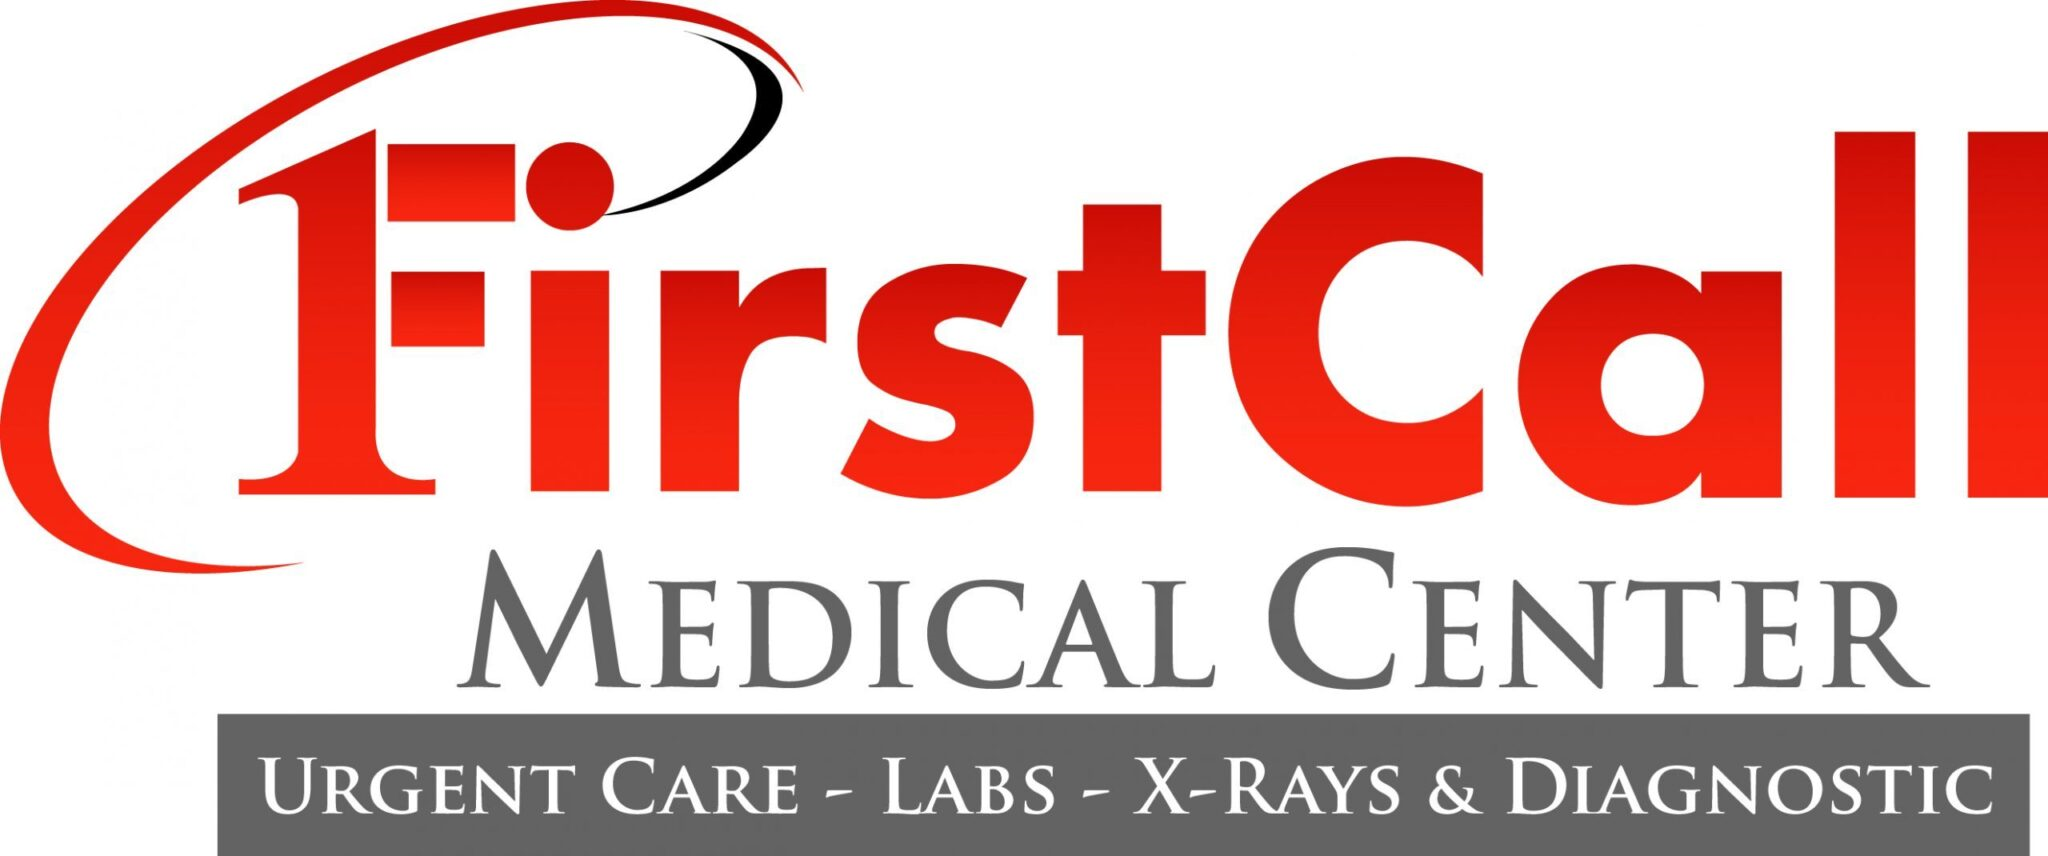 First Call Medical Center - BWI Airport - Terminal C Logo